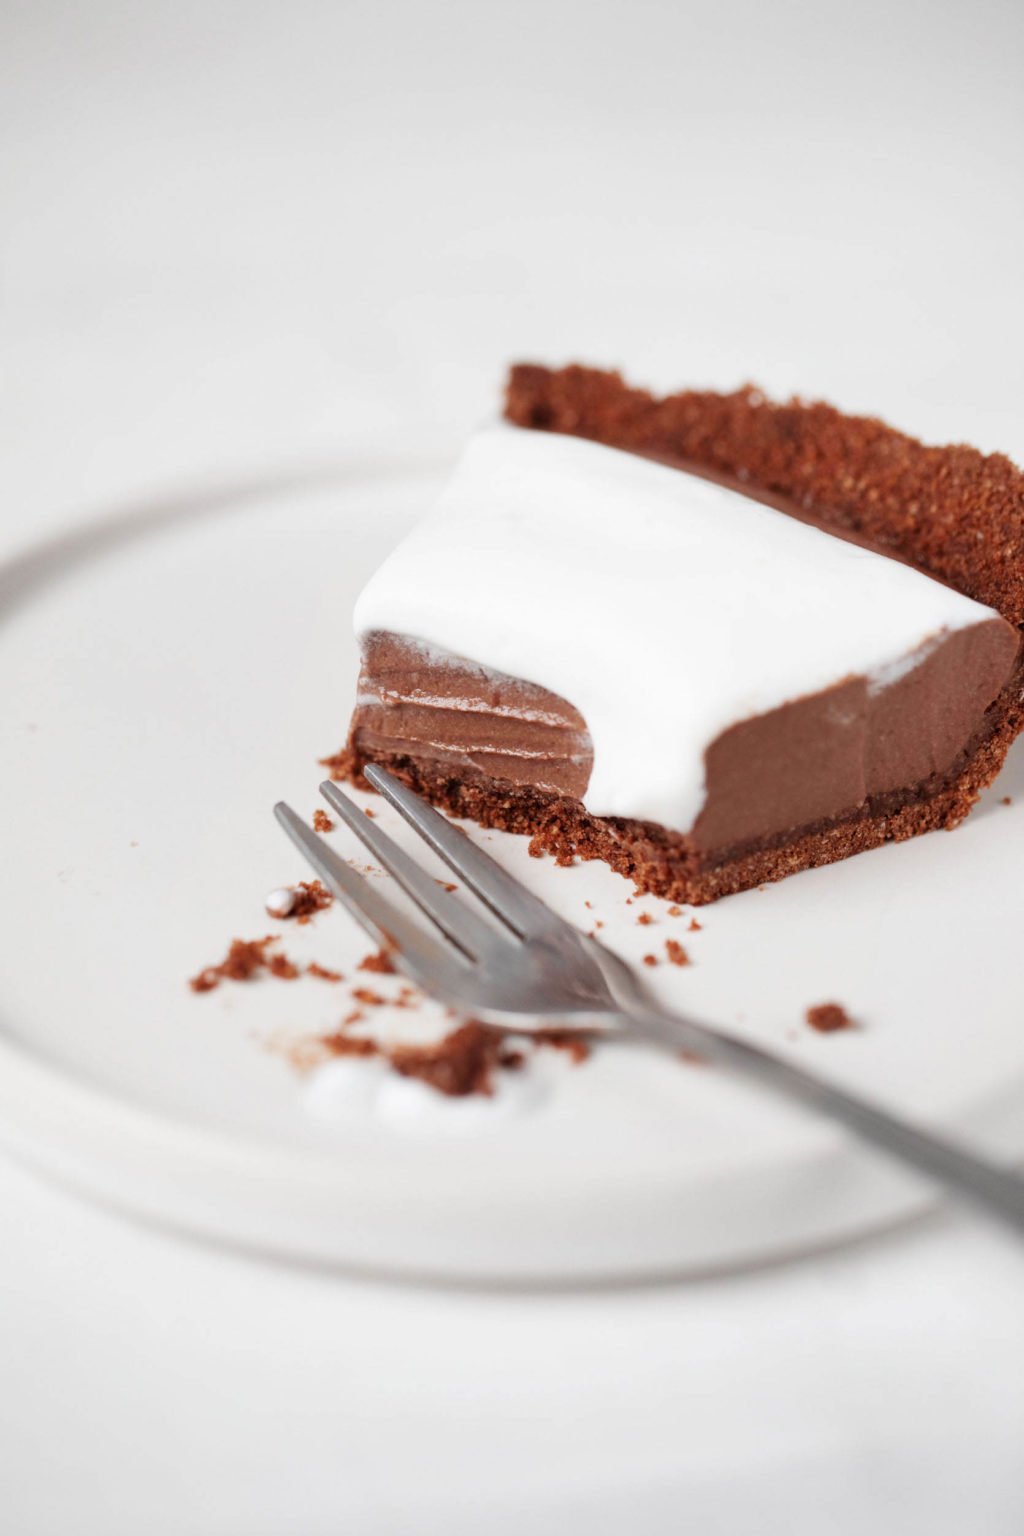 A slice of chocolate mousse pie is being eaten. It rests on a white dessert plate with a silver fork nearby.